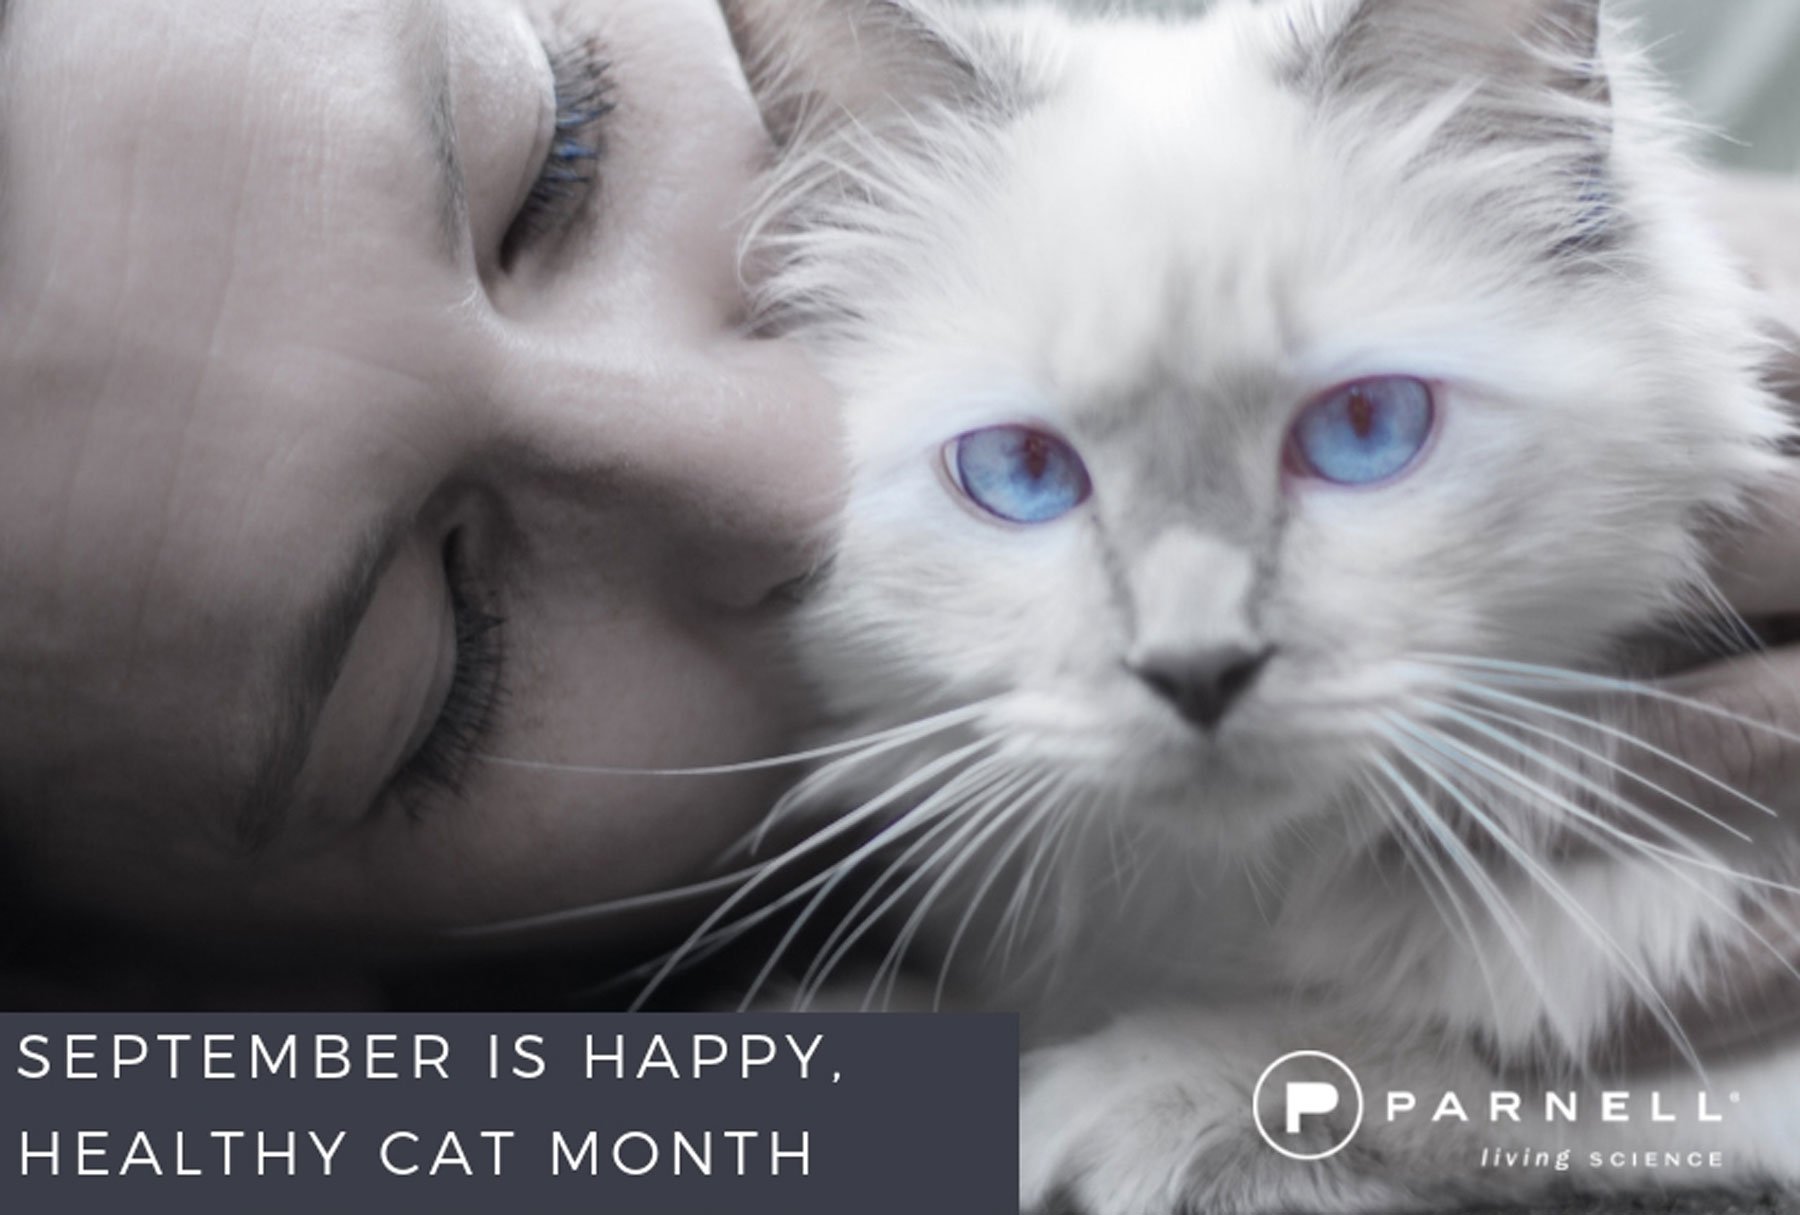 September as Happy, Healthy Cat Month